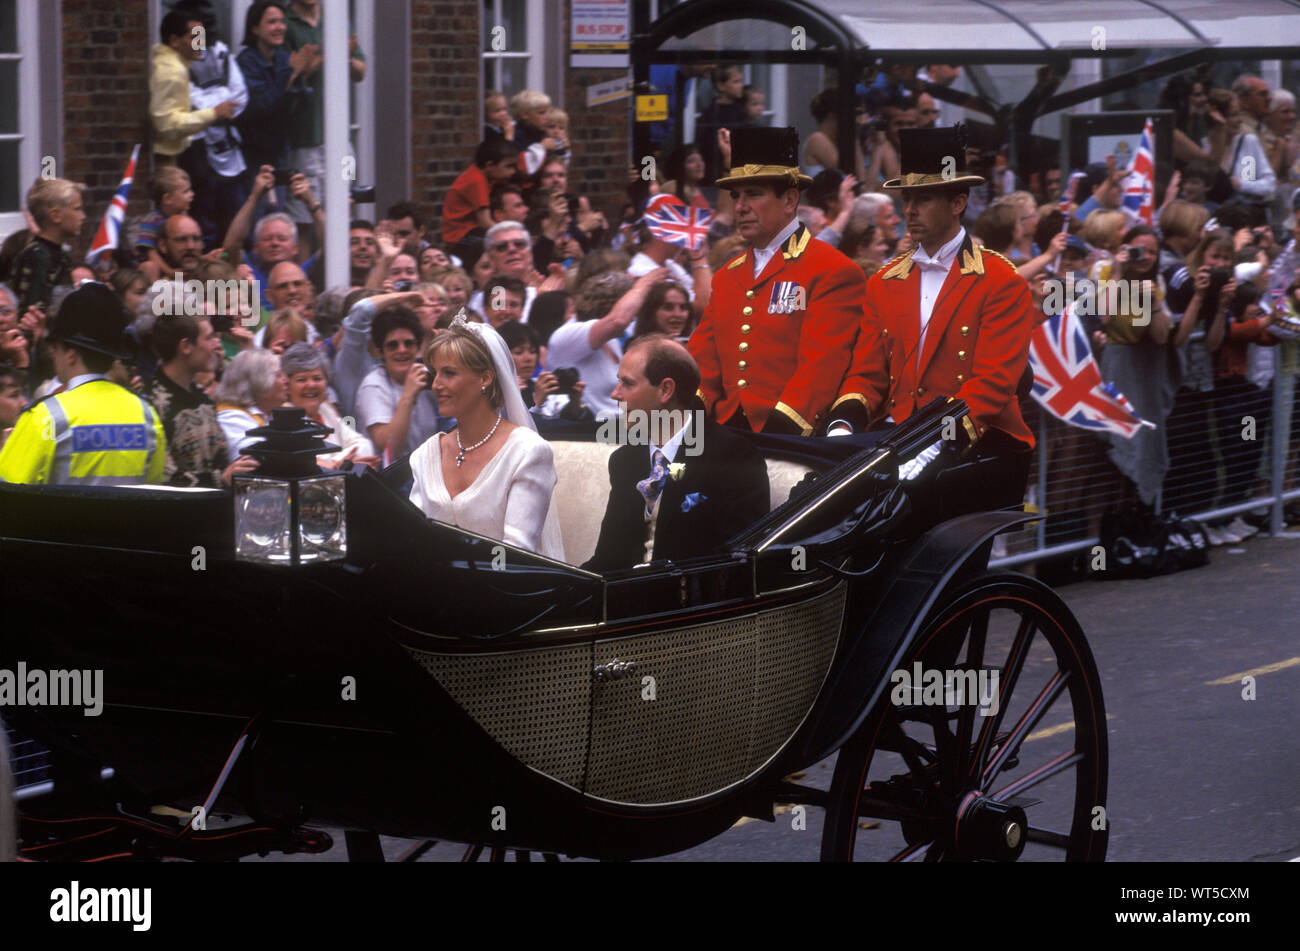 Royal Wedding Prince Edward Sophie Rhys Jones 1999 Countess of Wessex Earl of Wessex Windsor open carriage waiving to the crowd of onlookers spectators  after their marriage 1990s UK HOMER SYKES Stock Photo